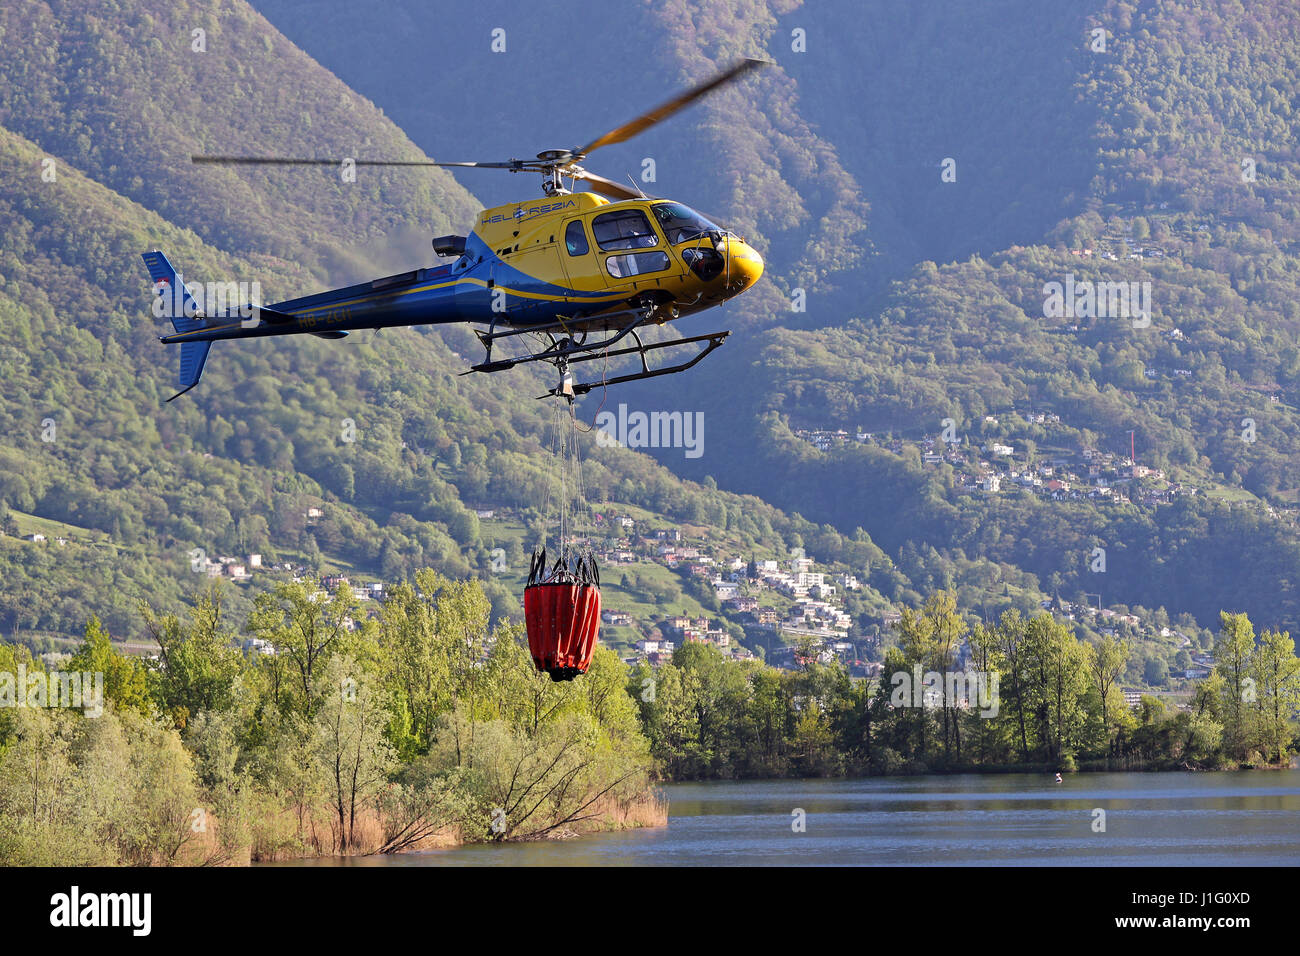 Fire fighting efforts are under way with helicopters to put out forest fires above Gordola, Ticino, Switzerland, on April 19th, 2017 Stock Photo